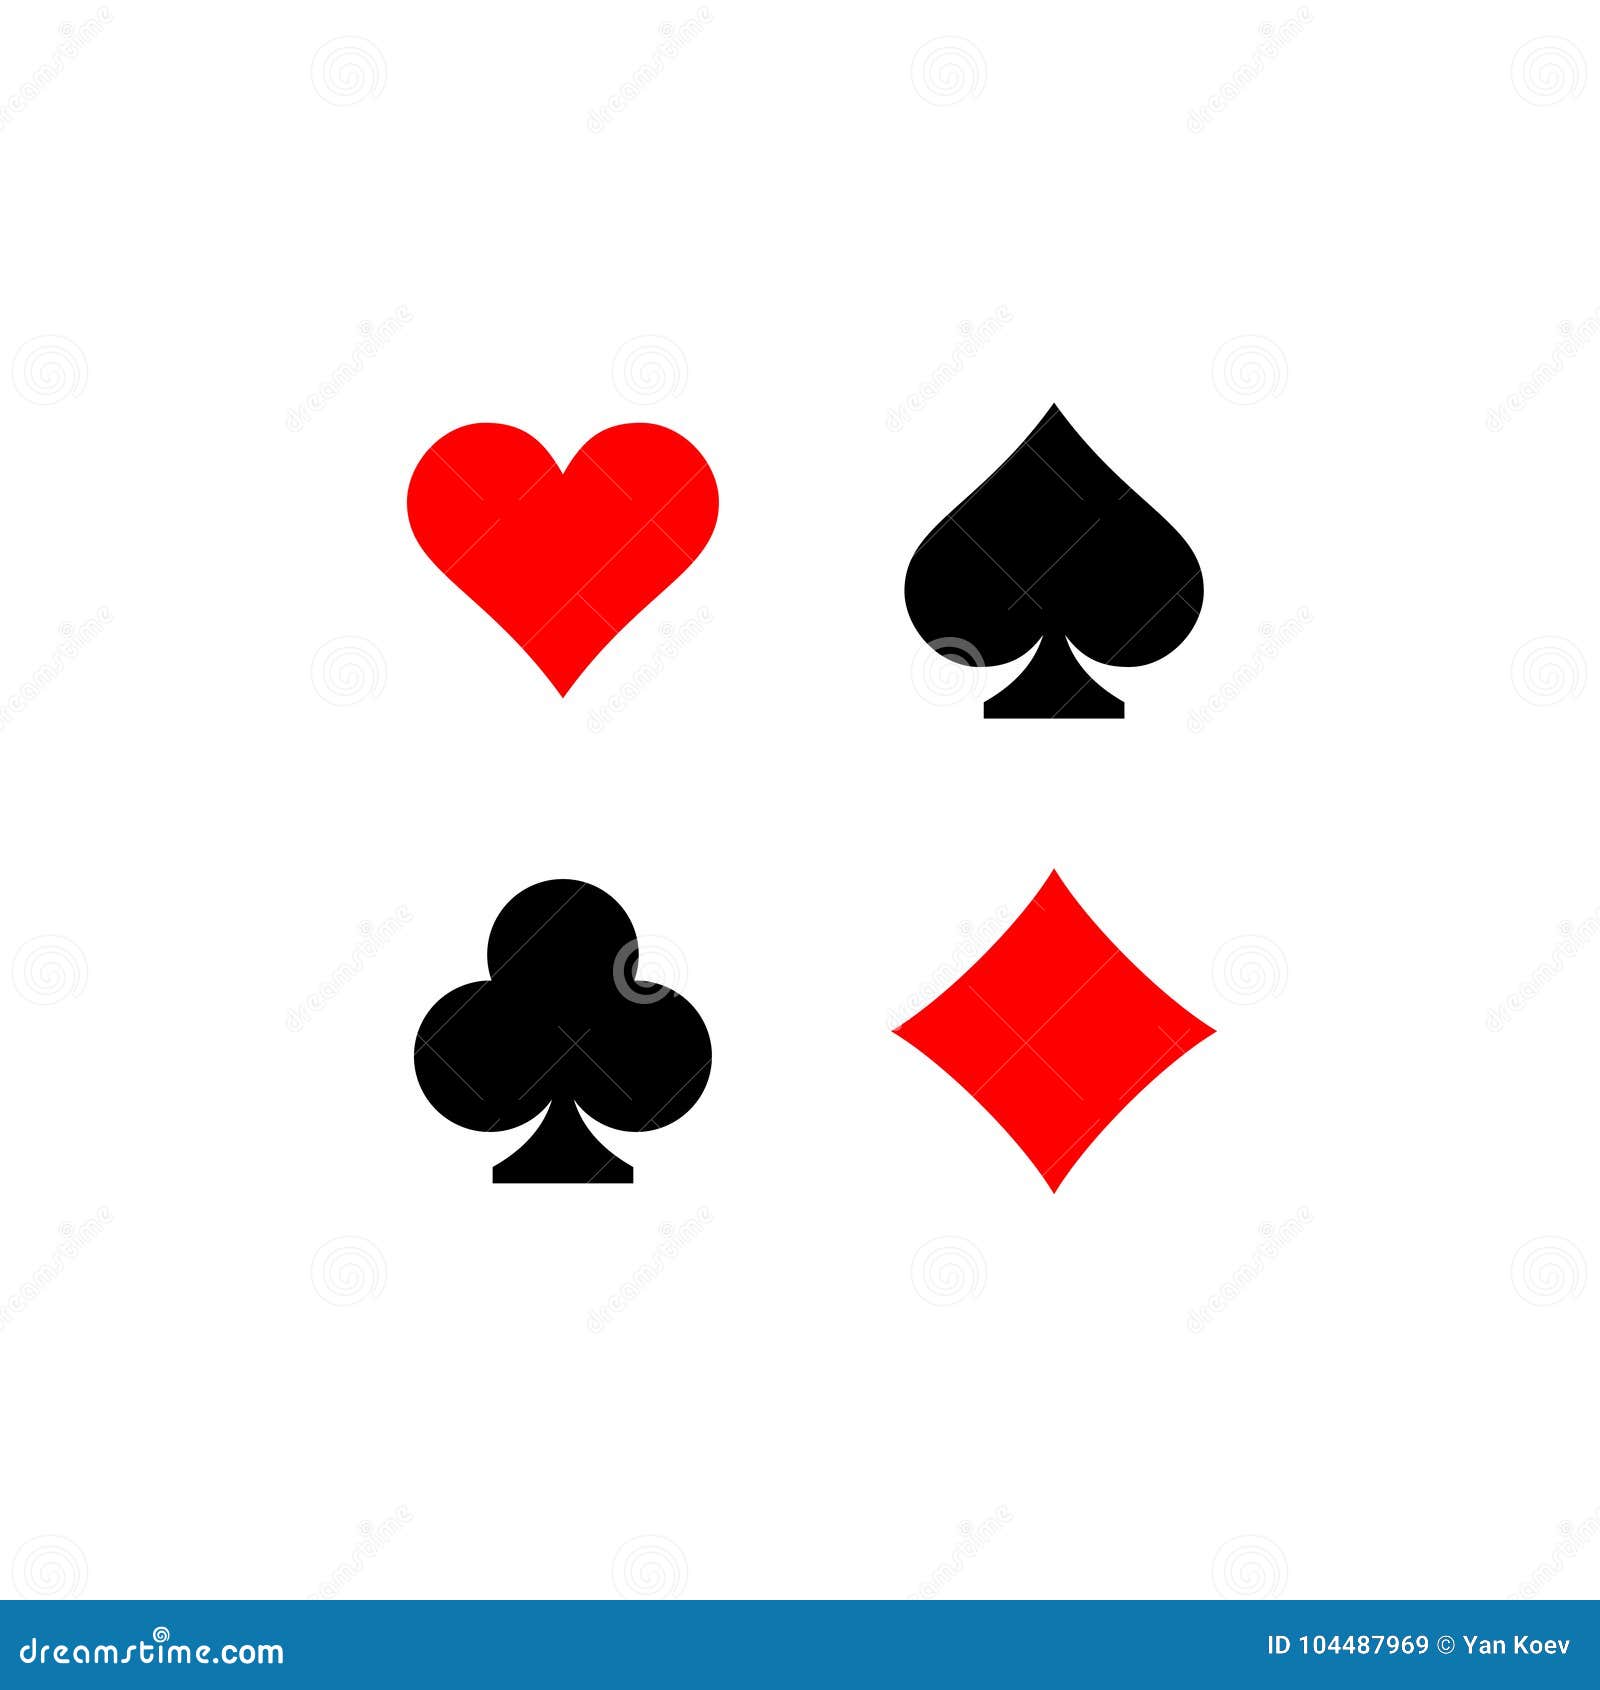 playing card suits signs set. four card s.